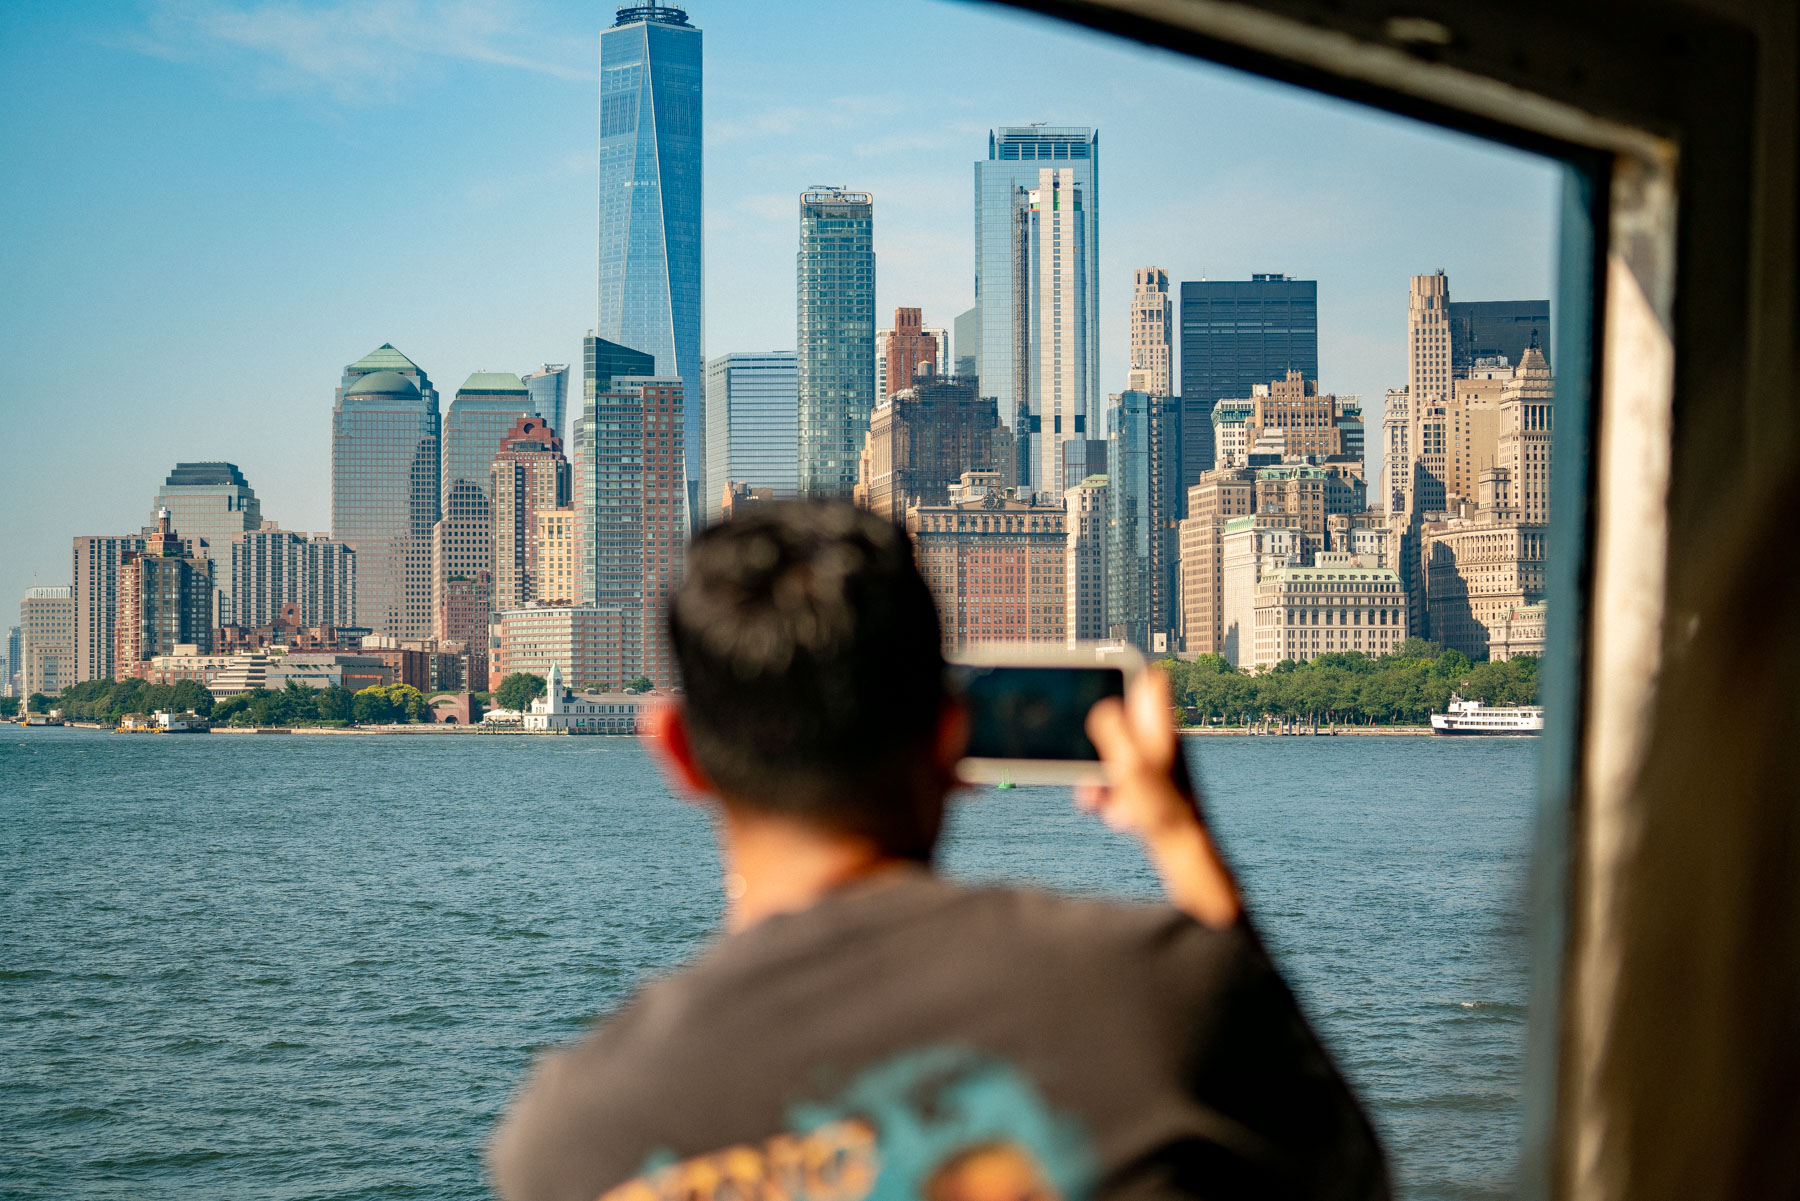 How to not look like a tourist in NYC
Best time to visit New York City 